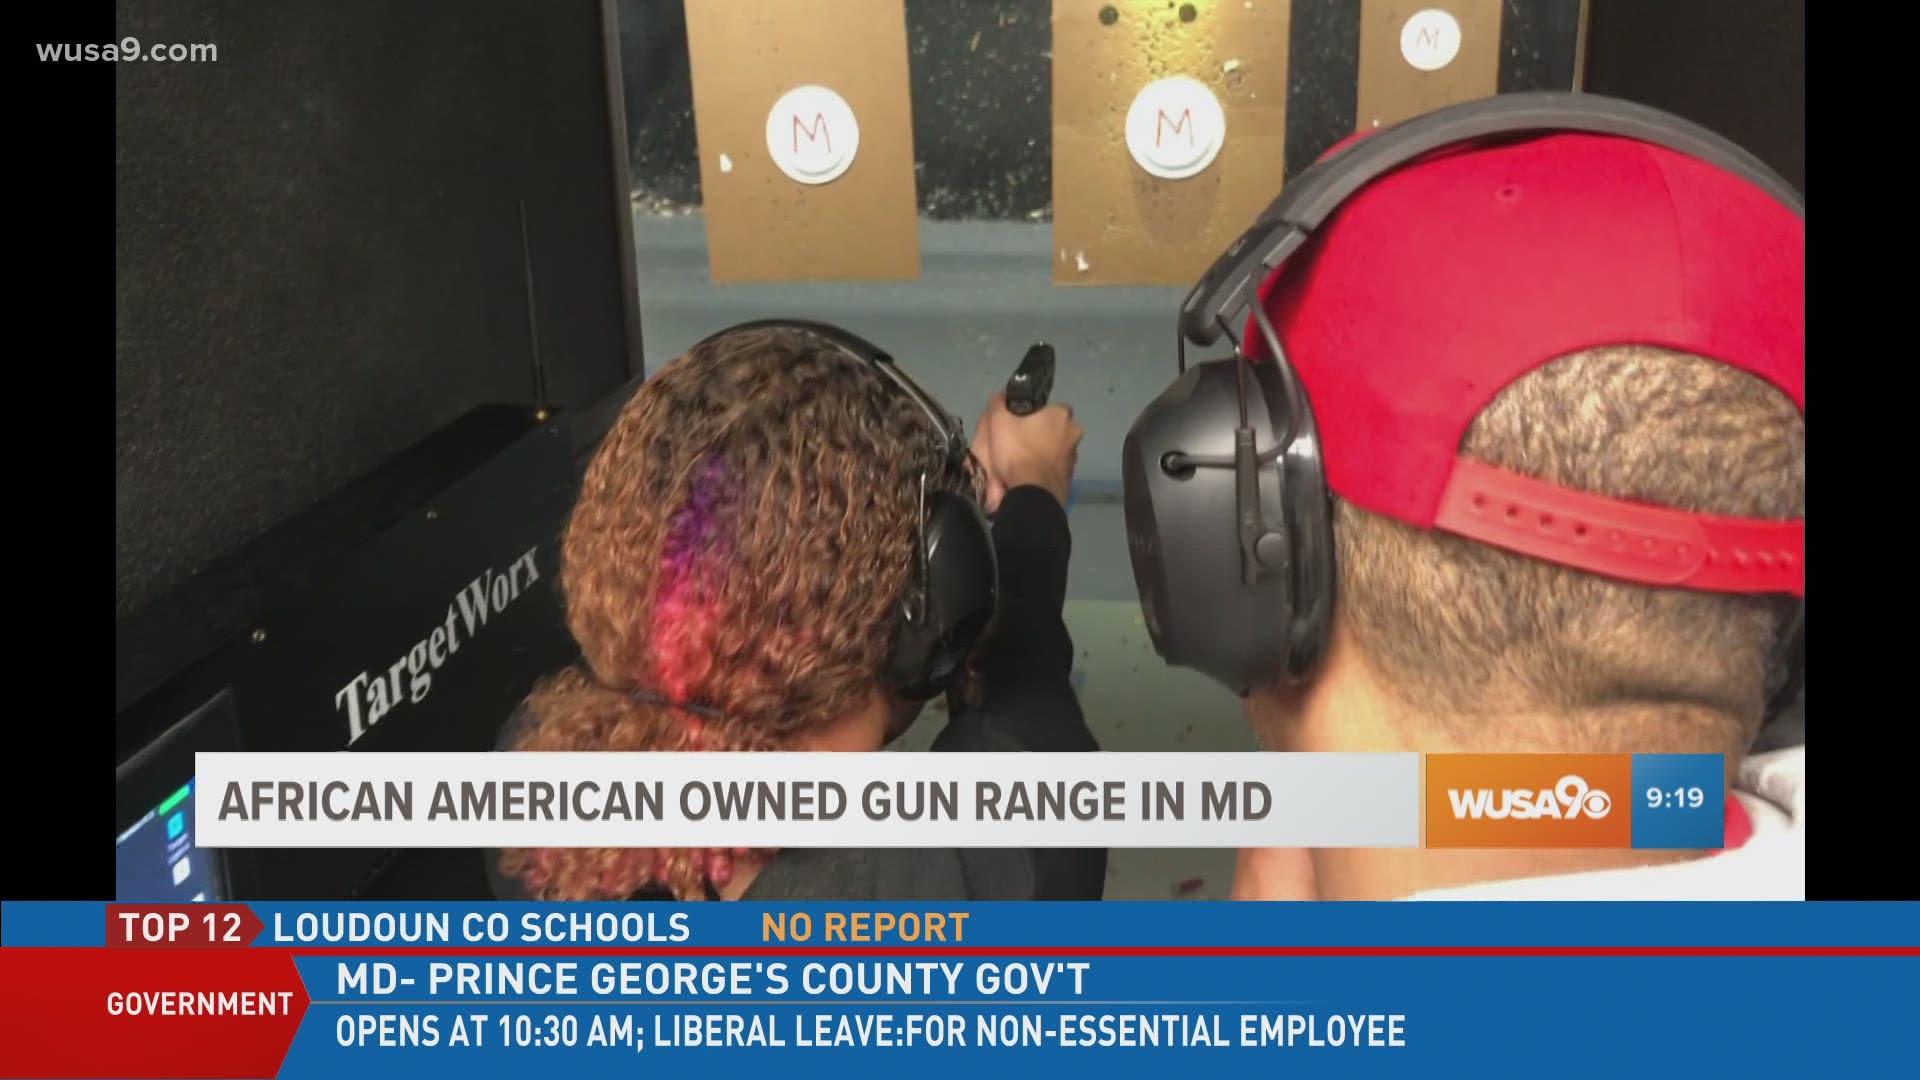 Rich Dudley, owner of MD Arsenal and general manager and safety officer Mike Faith discuss the growing number of gun owners in our area.